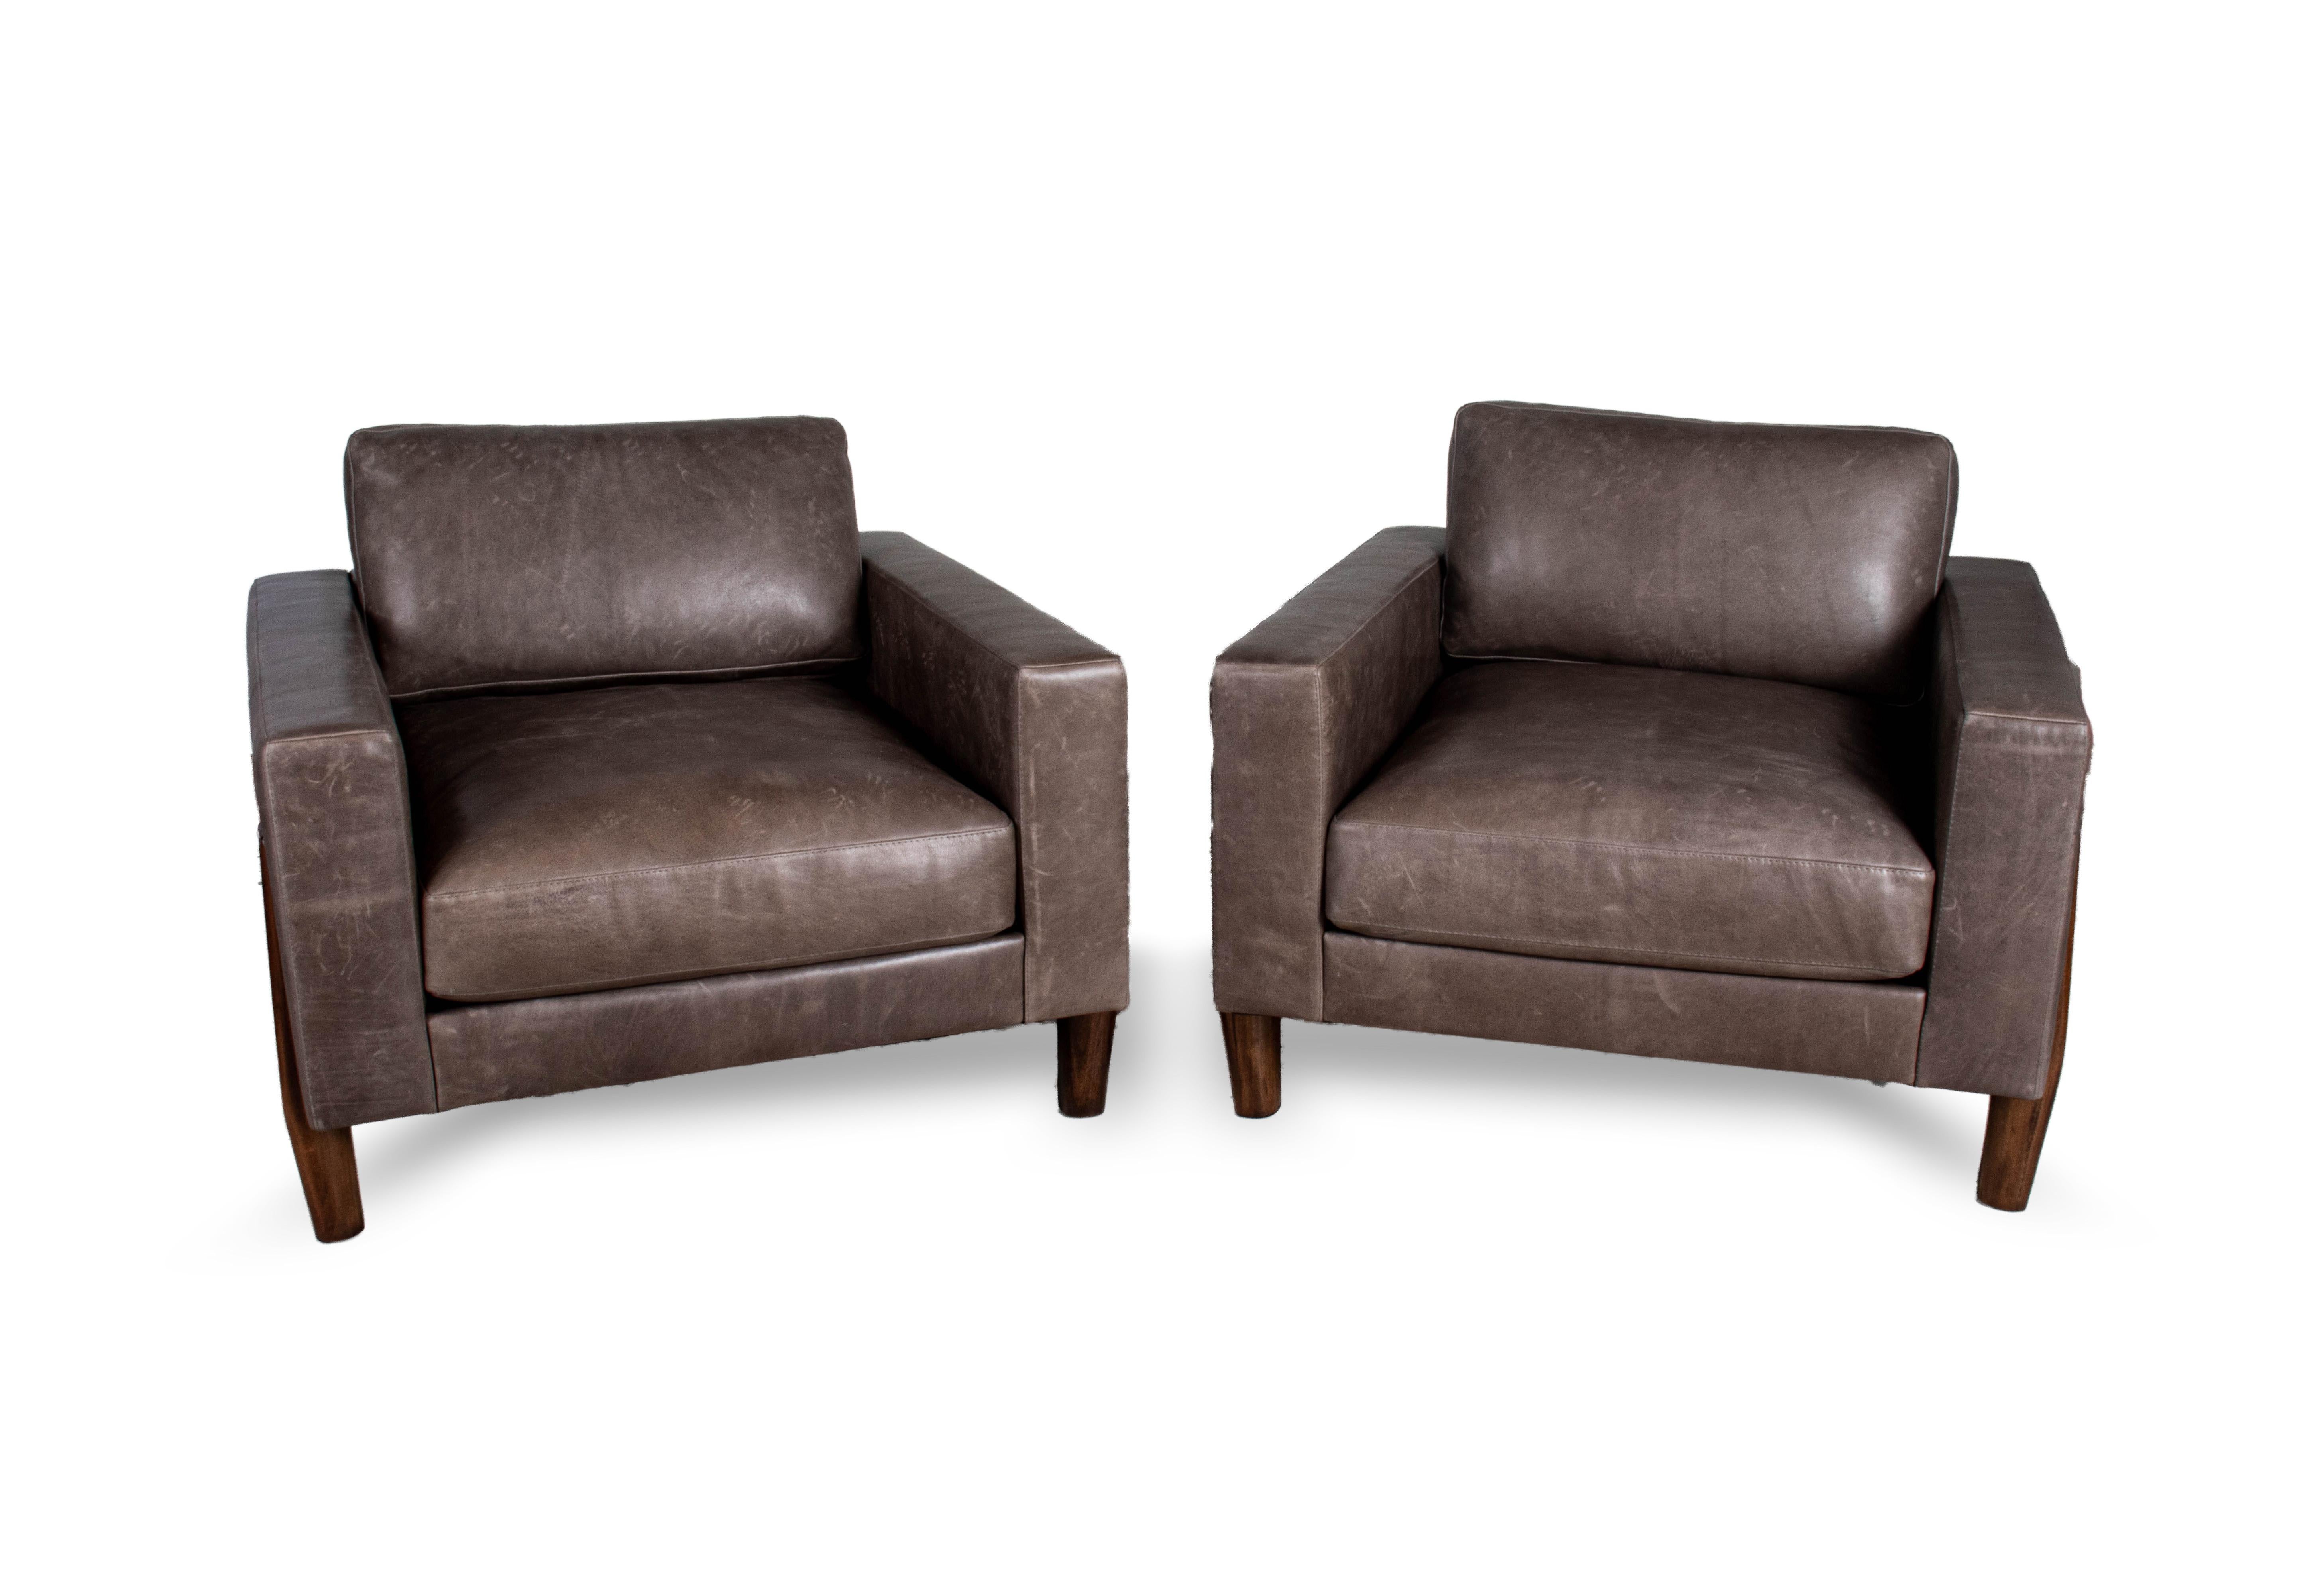 Leather: Wyatt Truffle
Finish: Grise 
Insert: Foam and Down

Designed and manufactured in Dallas, TX

FrameWorks is the proprietary upholstery line of Brendan Bass, all designed and manufactured in Dallas, Texas. Frameworks offers modern